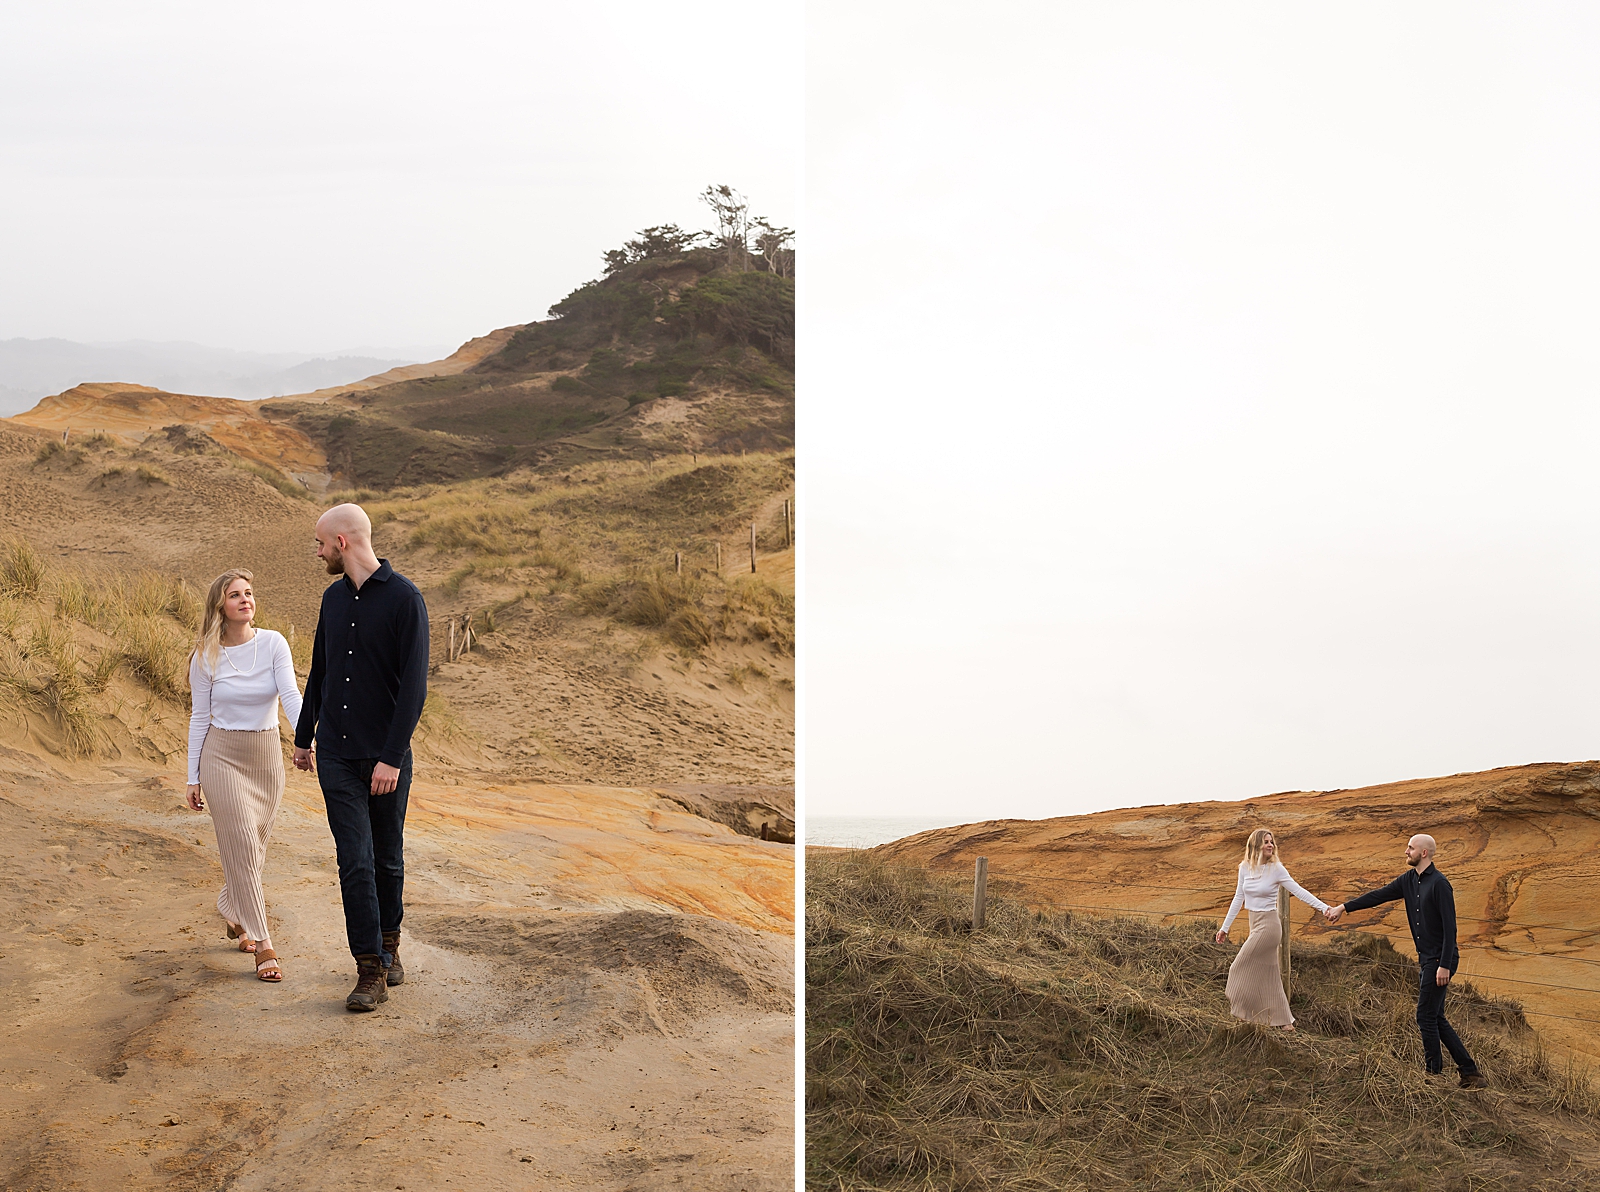 Couple holding hands walking on rocky canyon